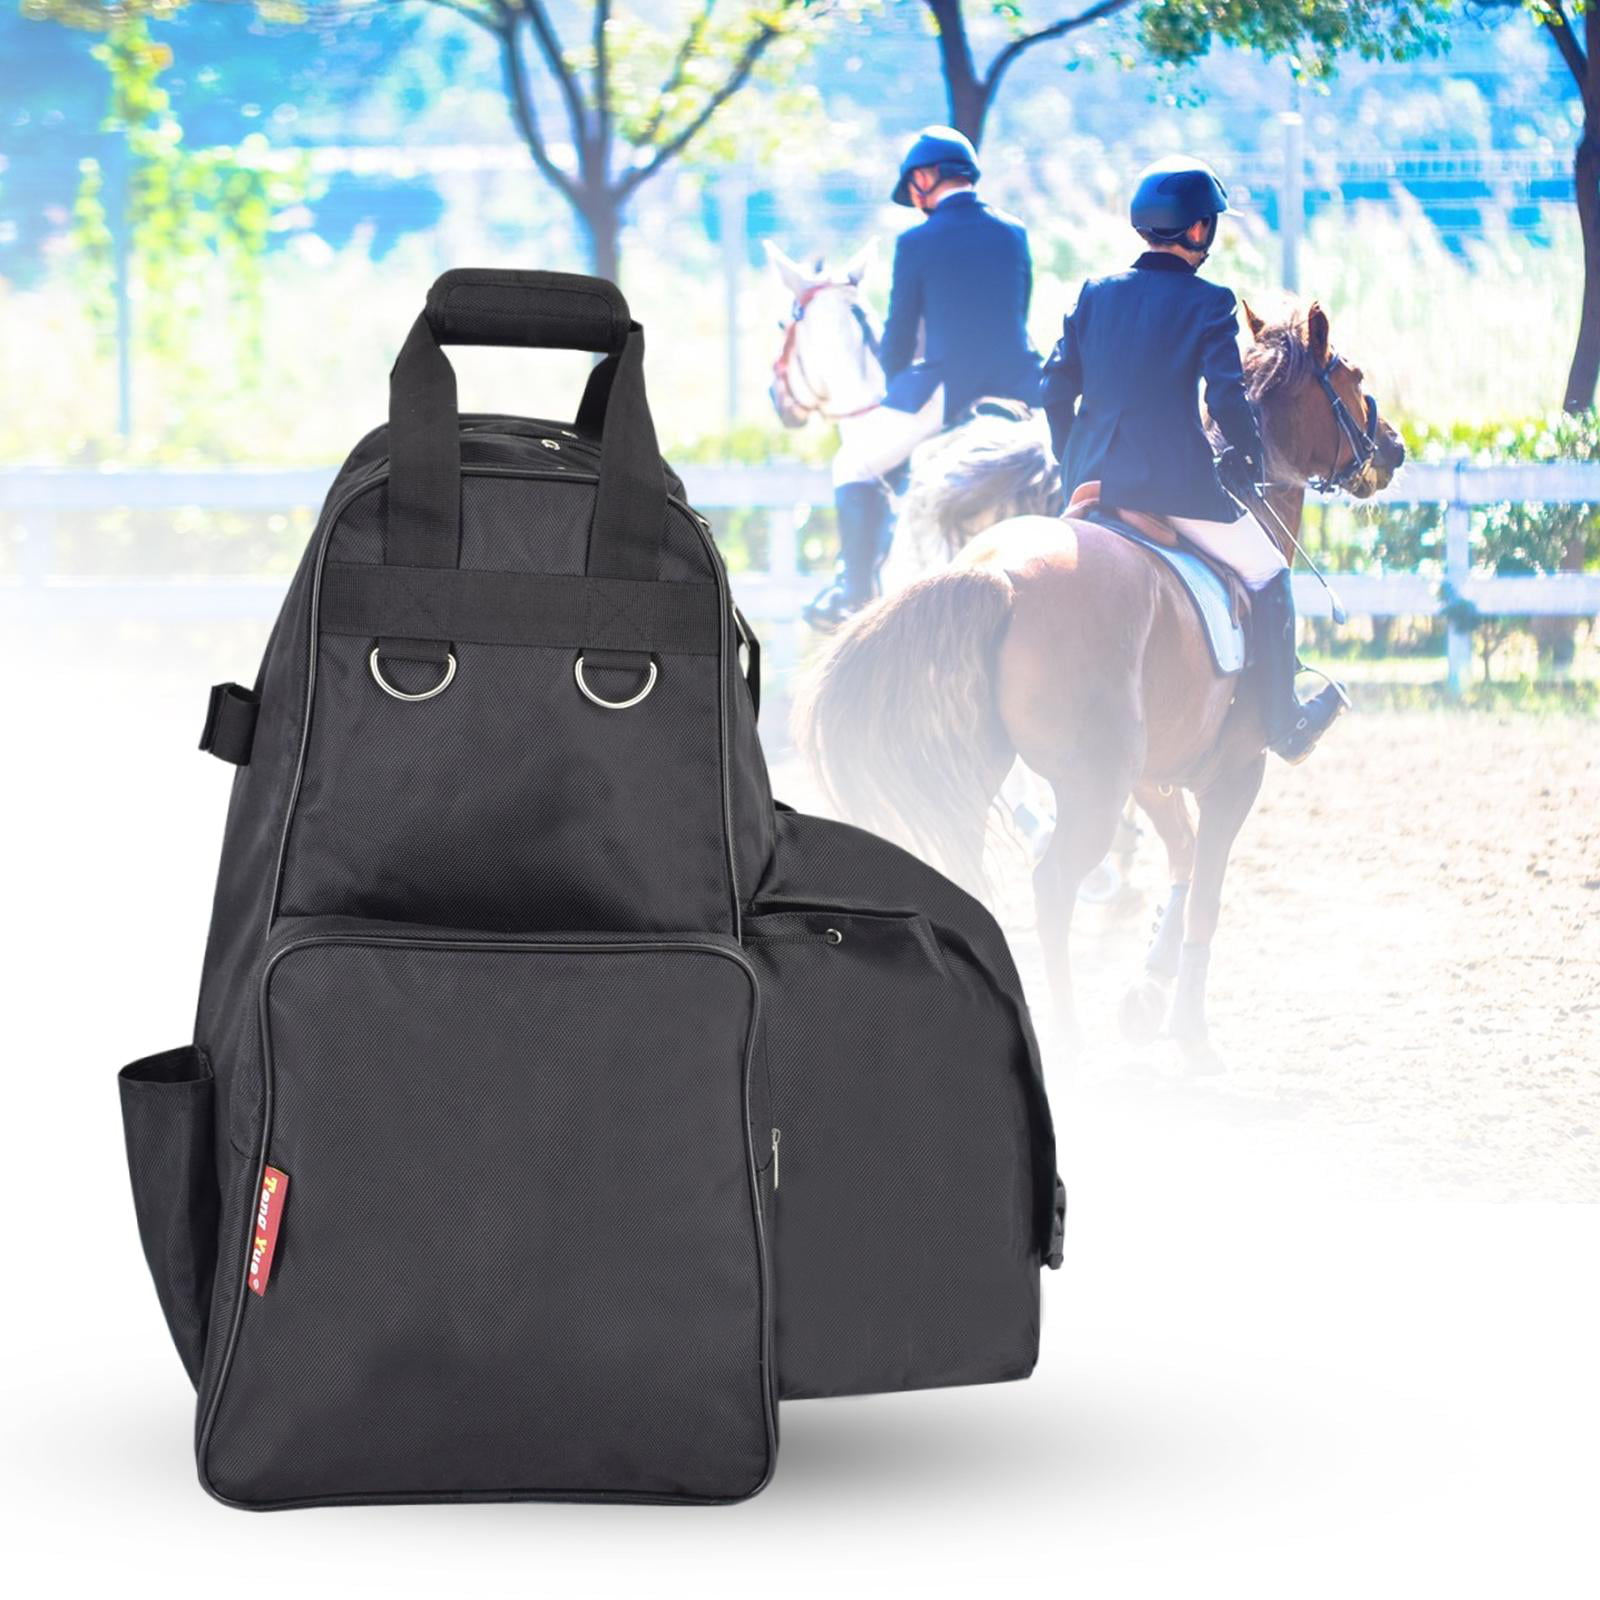 Details about   Waterproof Equestrian Bag with Helmet Compartment Horse Riding Boots Carry Bag 